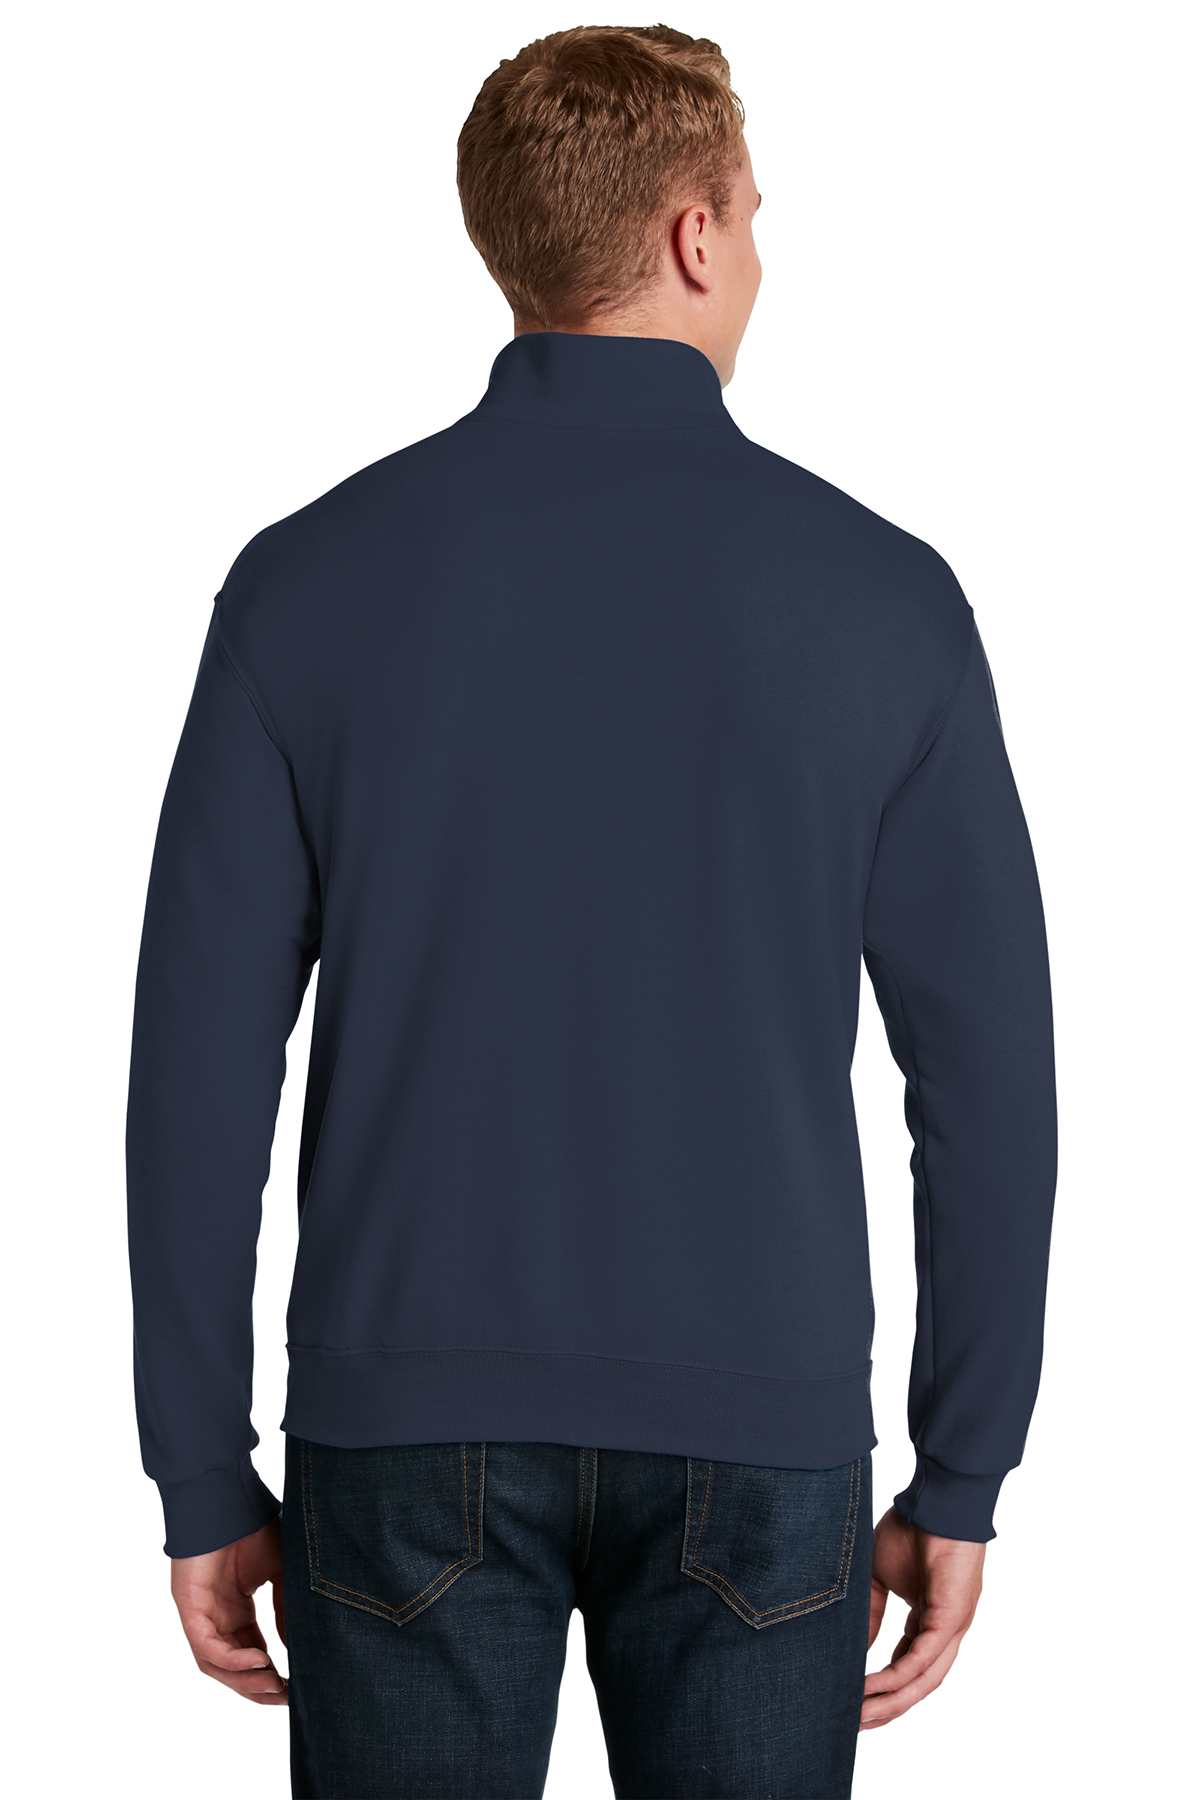 1/4 Zip Banded Collar Fishing Jersey (Team Pricing for 12+ Jerseys)